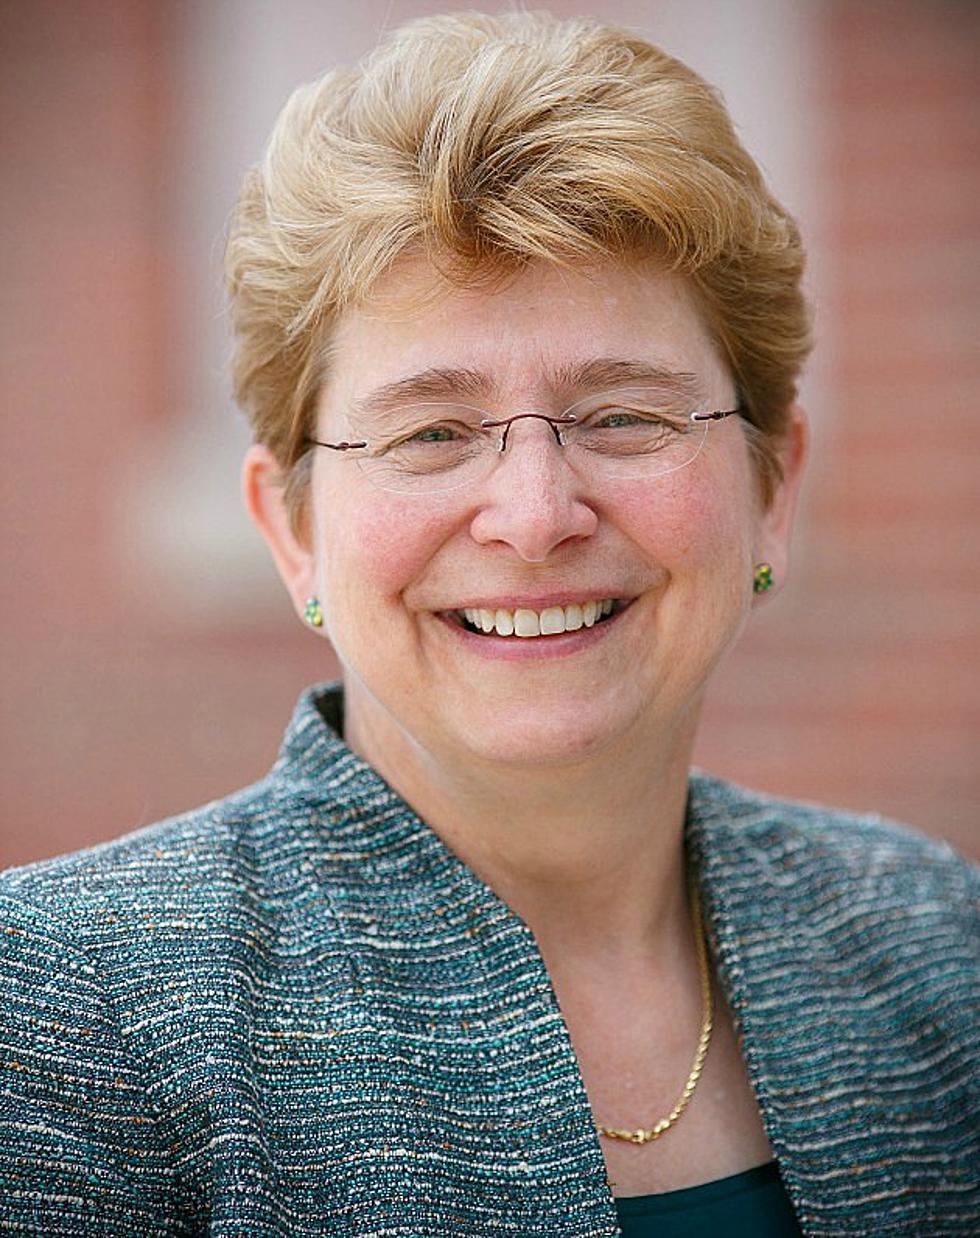 Hartwick College President Retiring After 13 Years